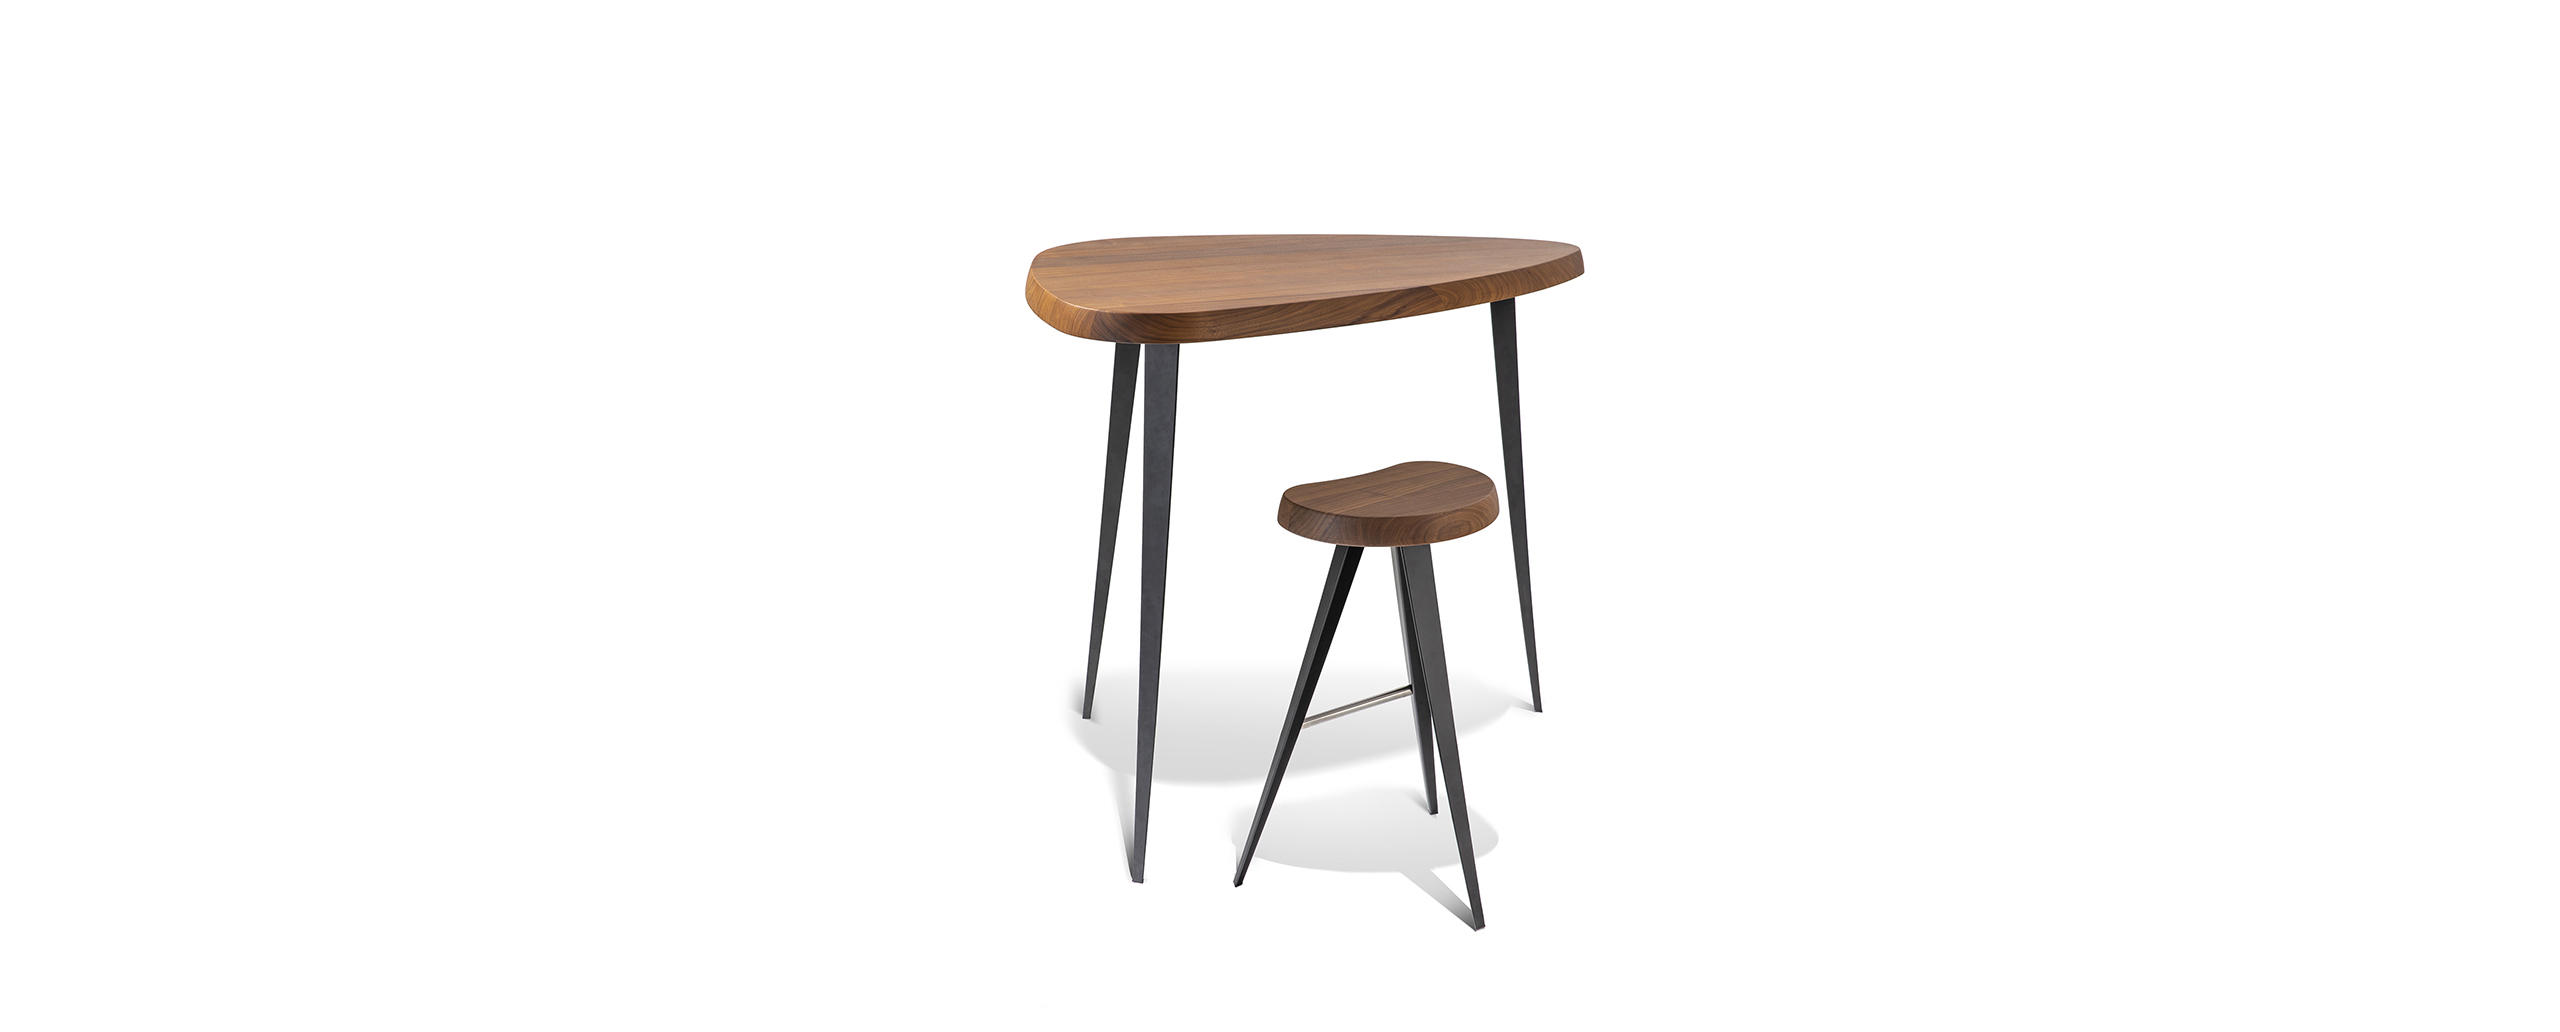 1_cassina_mexique_charlotte_perriand_bar_stool_and_table_0